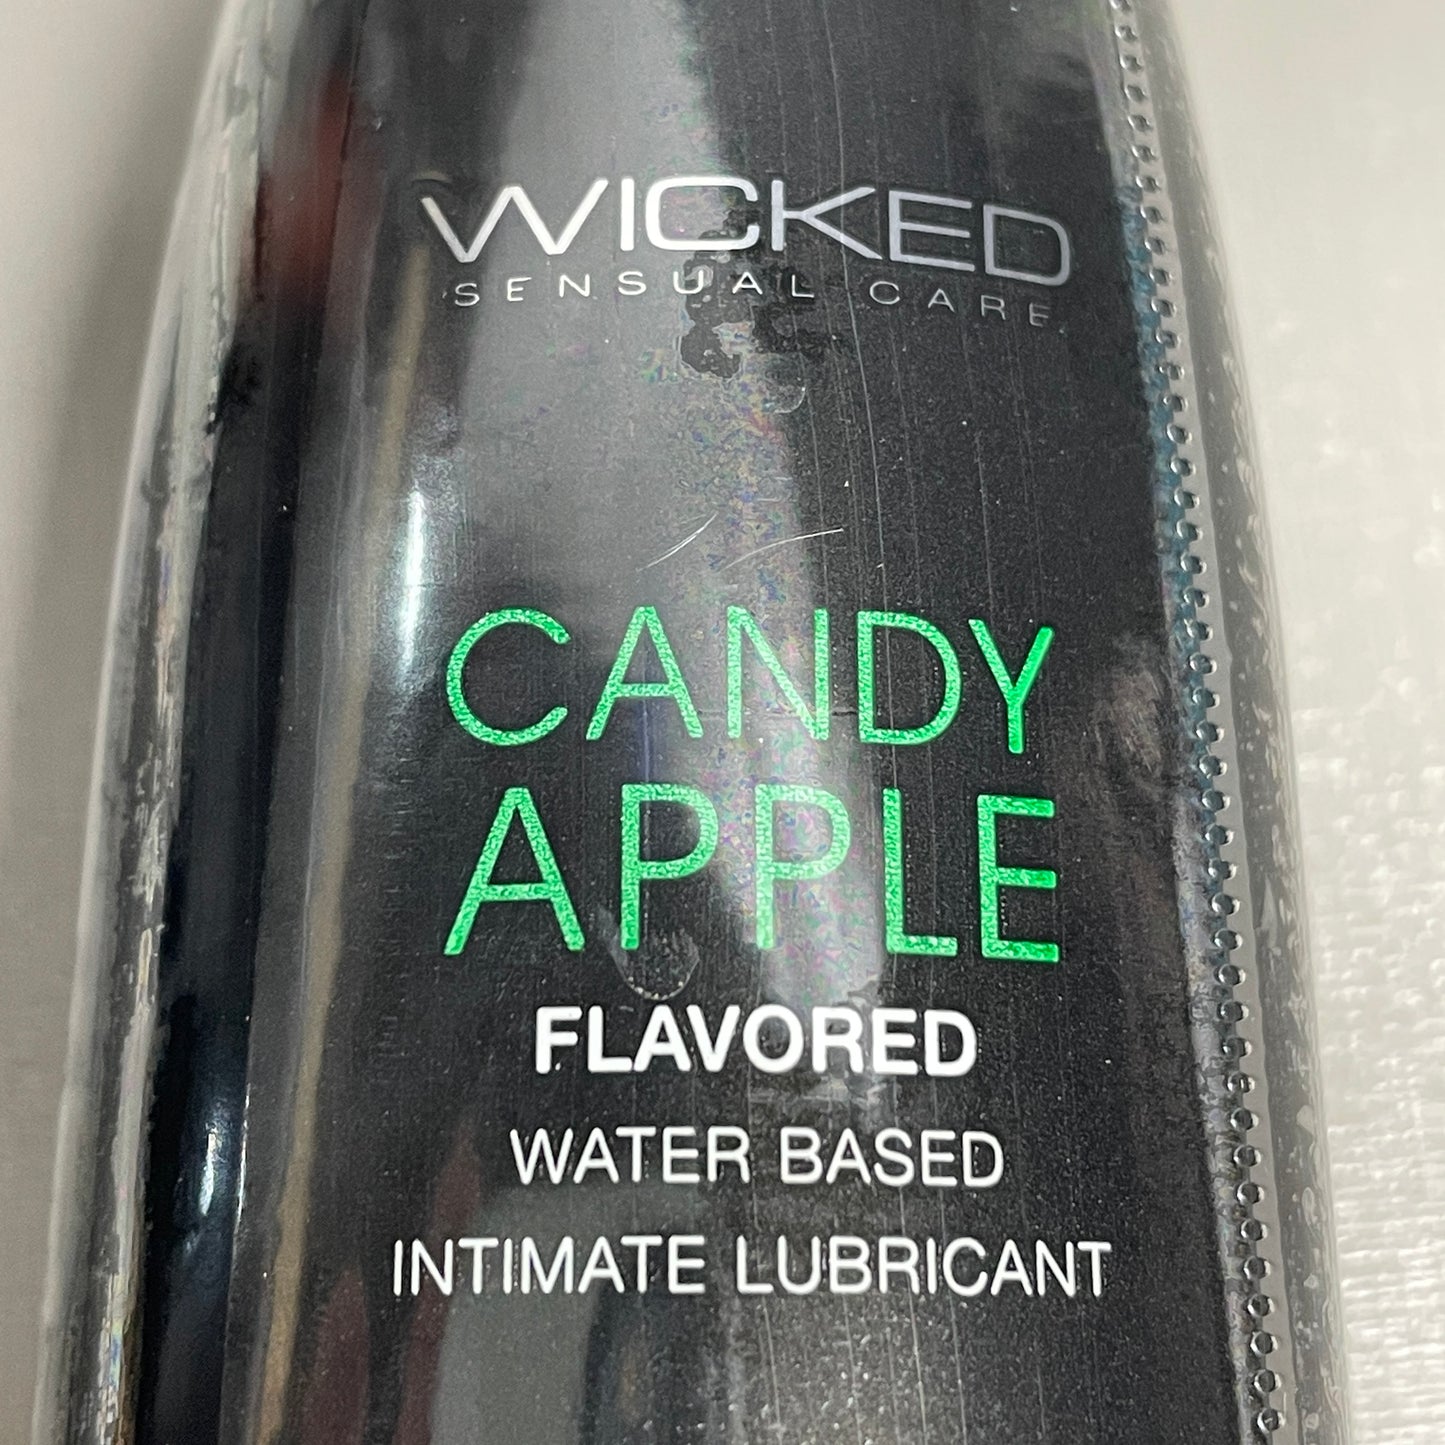 WICKED SENSUAL CARE 4-PACK Candy Apple Flavored Water Based Intimate Lubricant 2 oz Exp 12/23 (New)